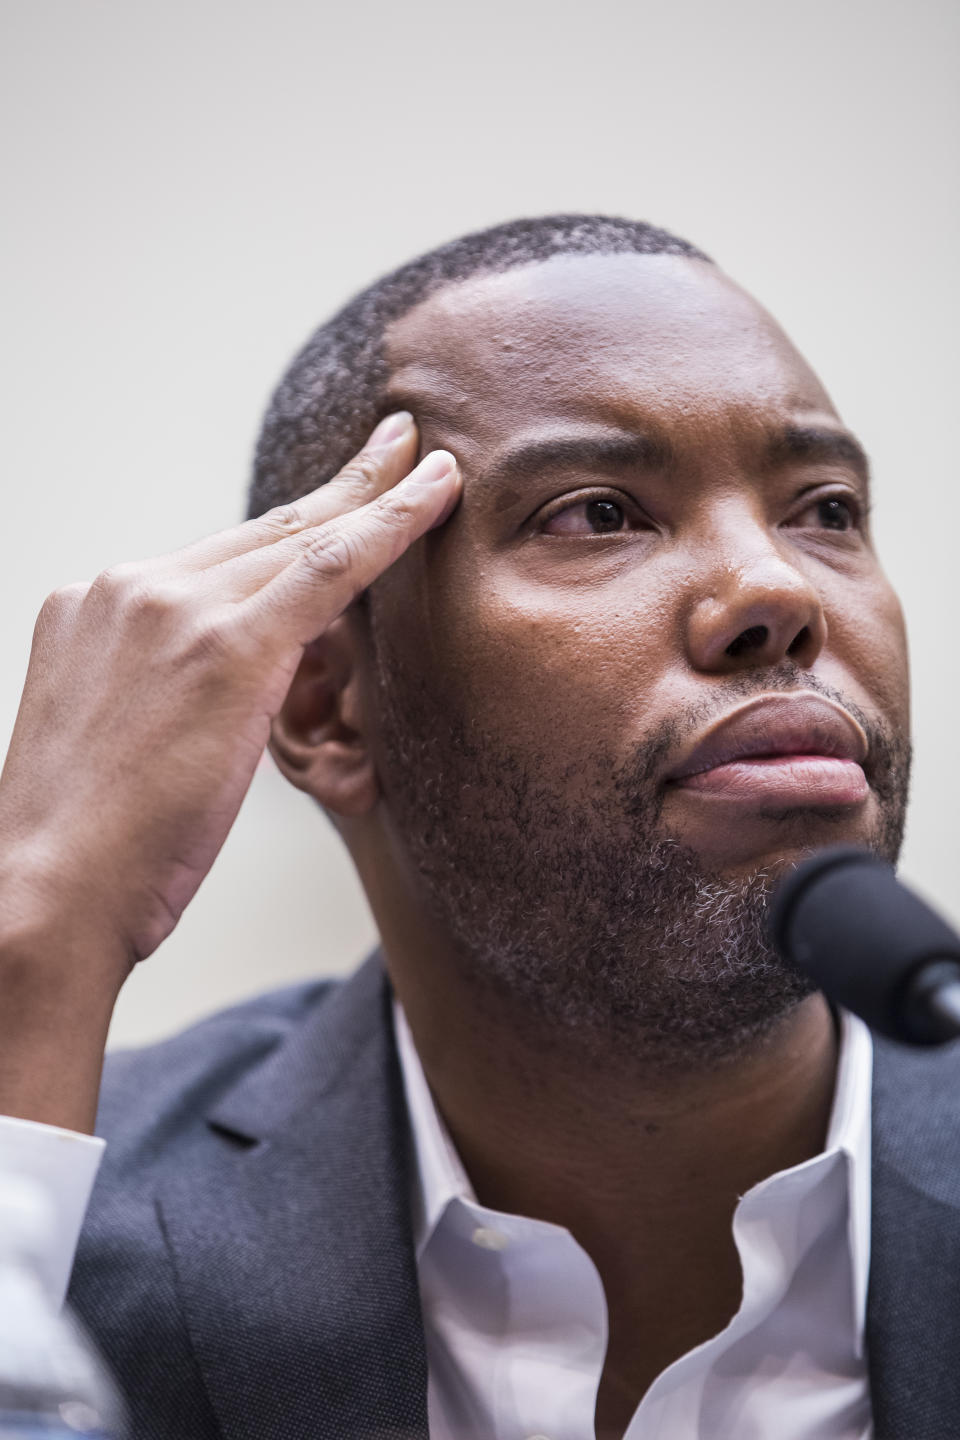 Writer Ta-Nehisi Coates testifies during a hearing on slavery reparations held by the House Judiciary Subcommittee on the Constitution, Civil Rights and Civil Liberties on June 19, 2019 in Washington, DC. The subcommittee debated the H.R. 40 bill, which proposes a commission be formed to study and develop reparation proposals for African-Americans.